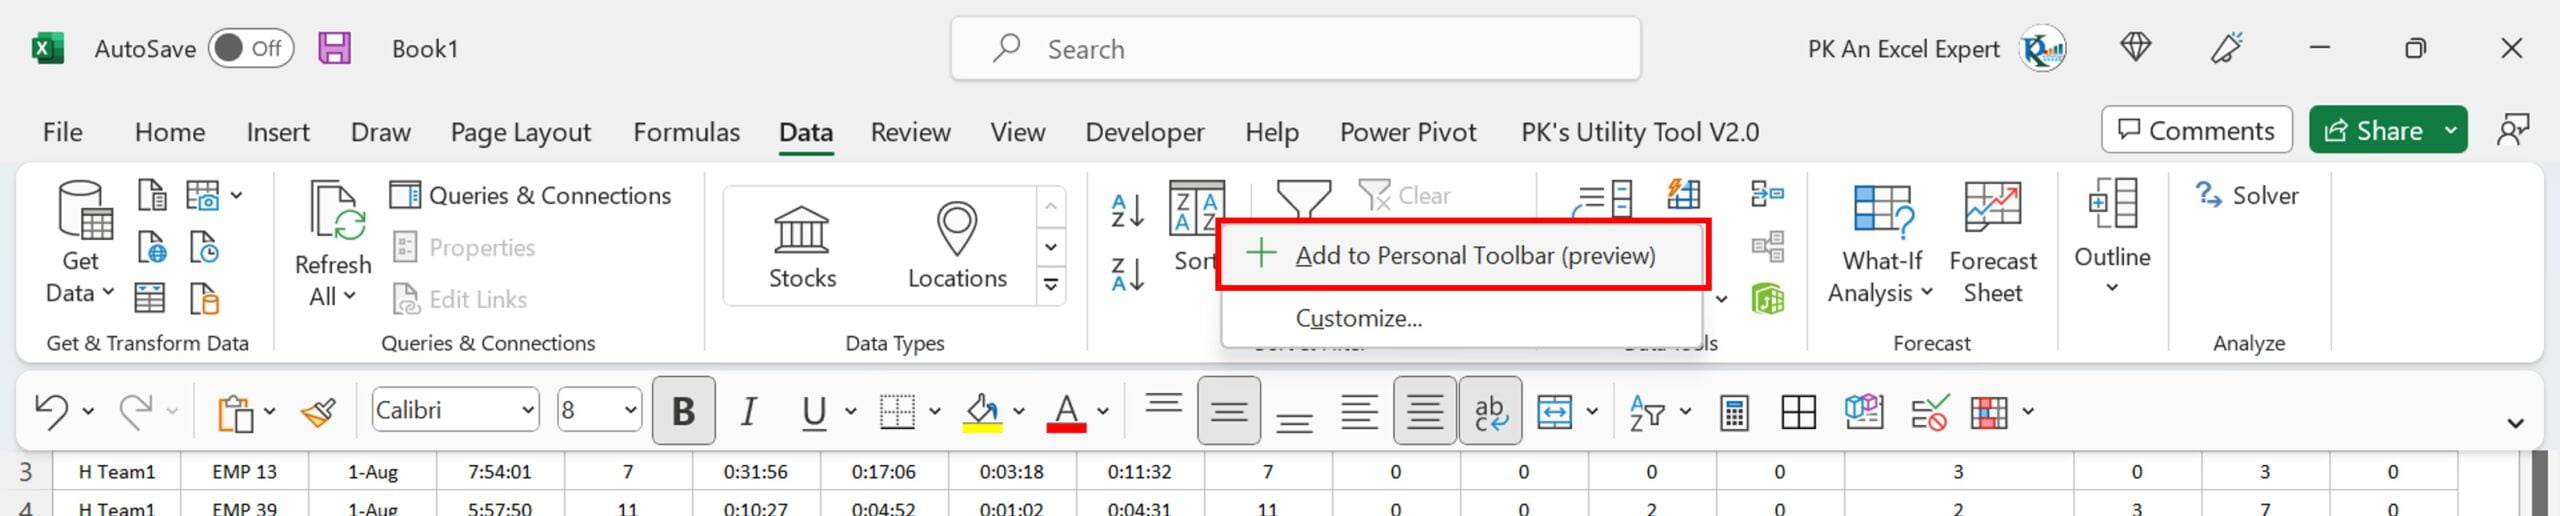 Add to Personal Toolbar (preview)